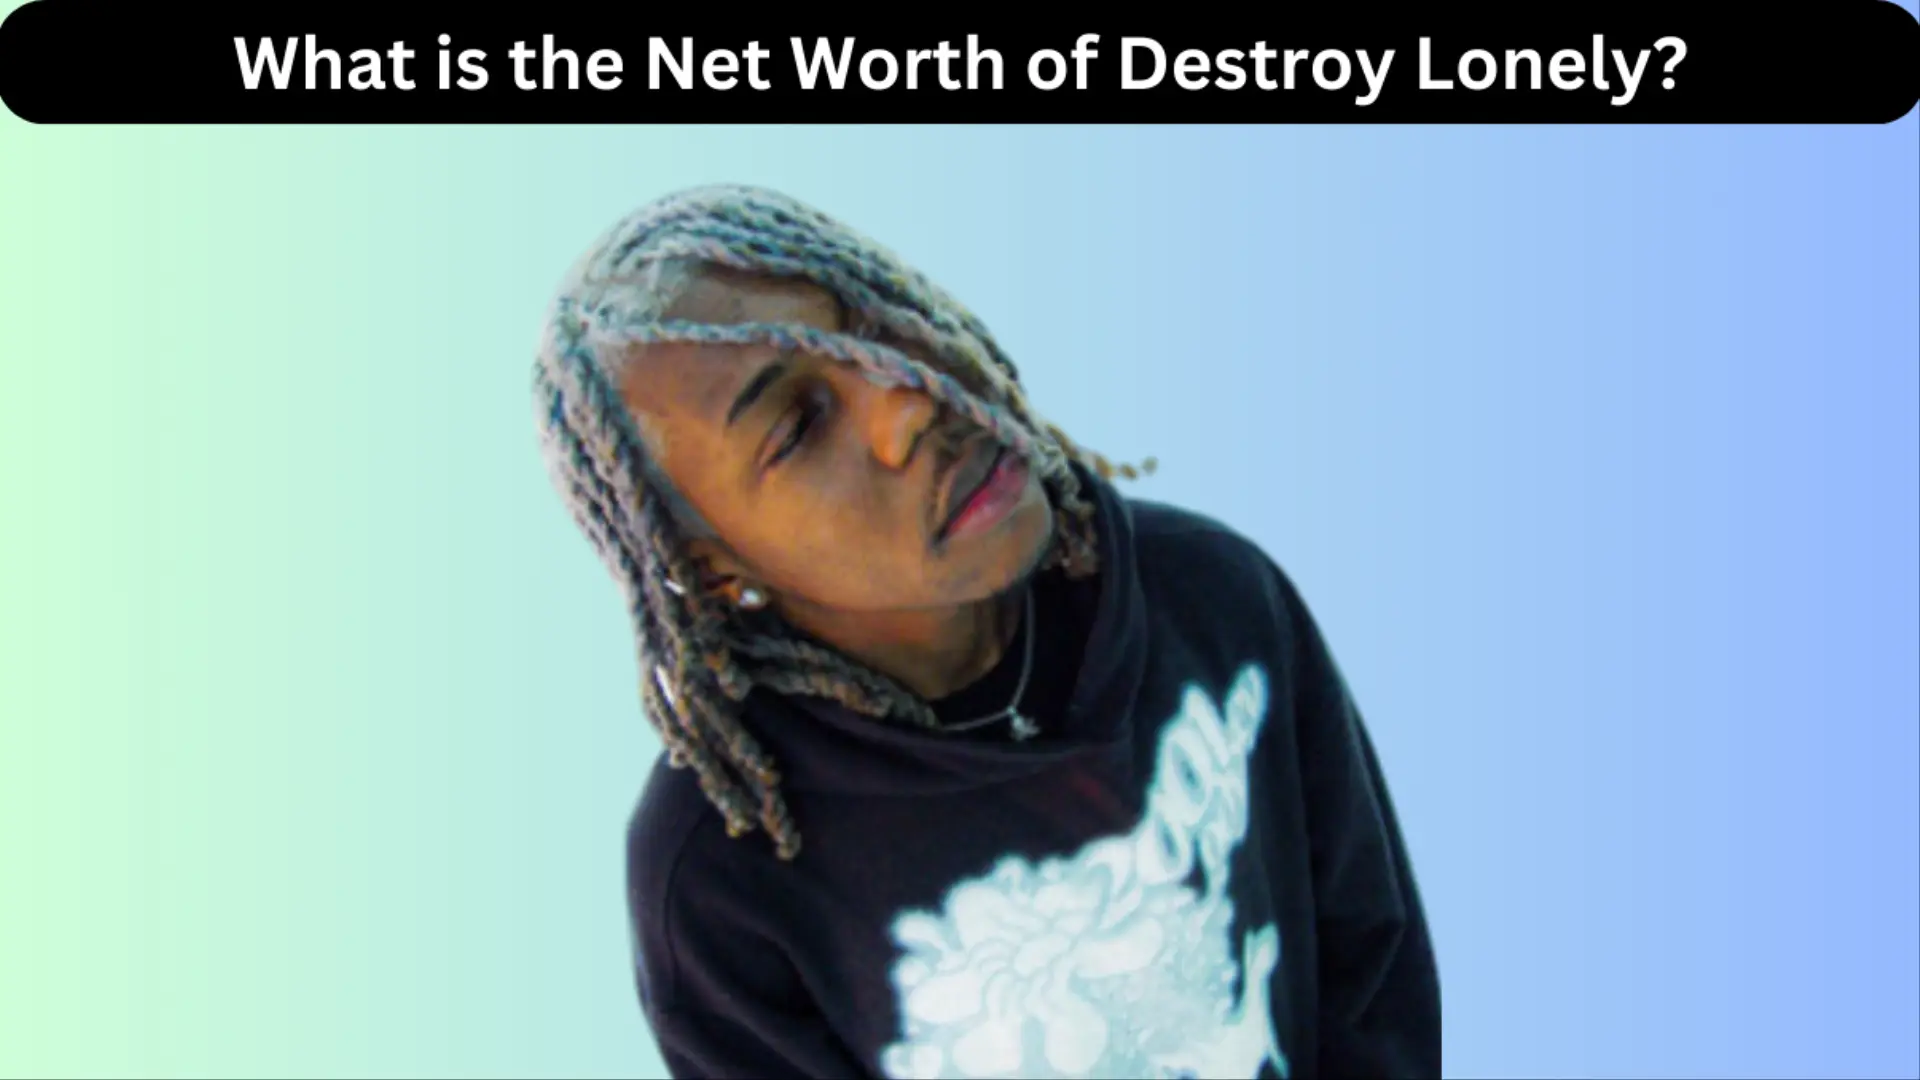 What is the Net Worth of Destroy Lonely